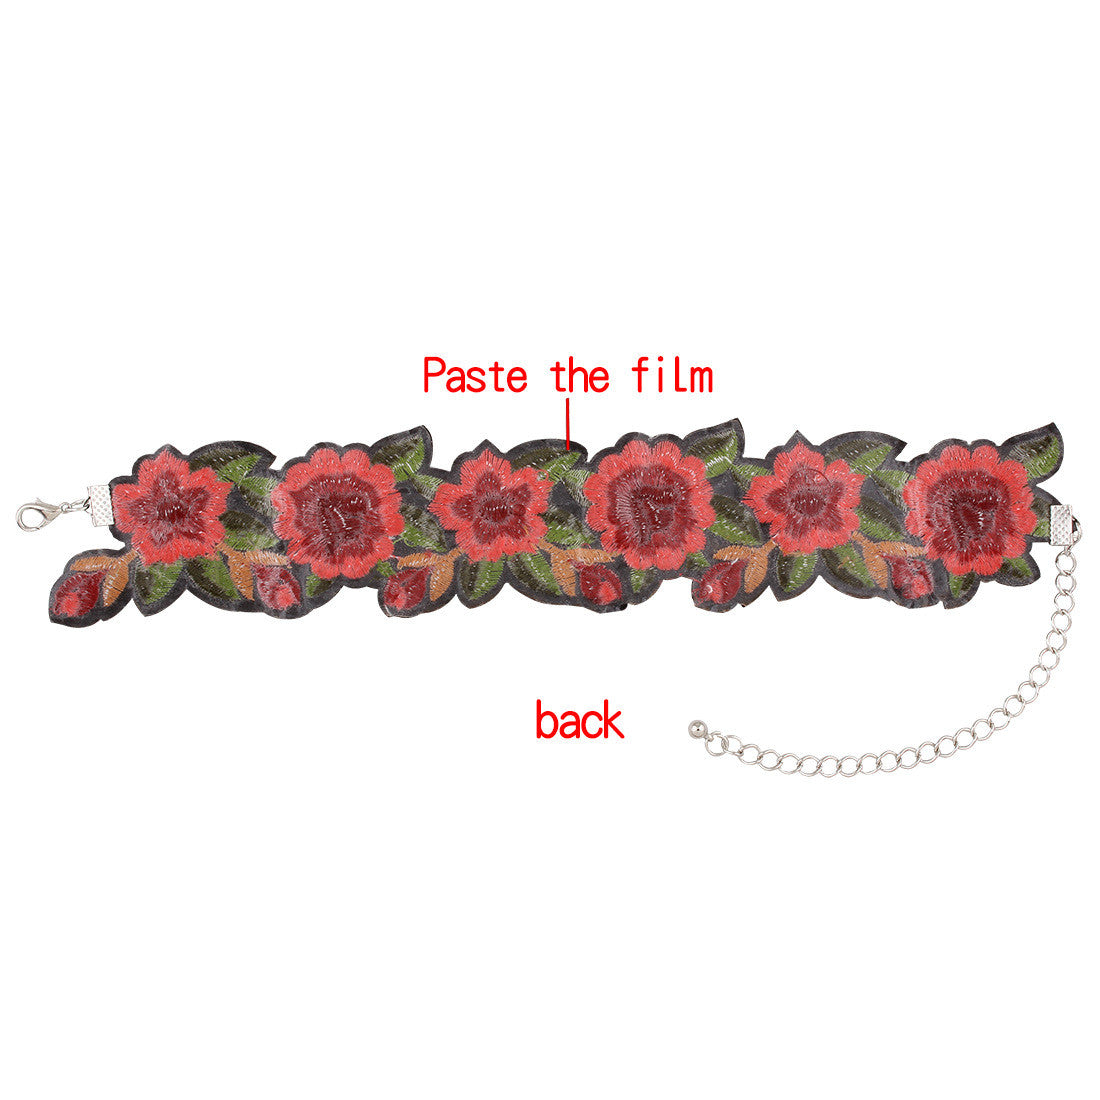 Rose Flower Sexy Boho Handmade Embroidered Floral Statement Choker Necklace